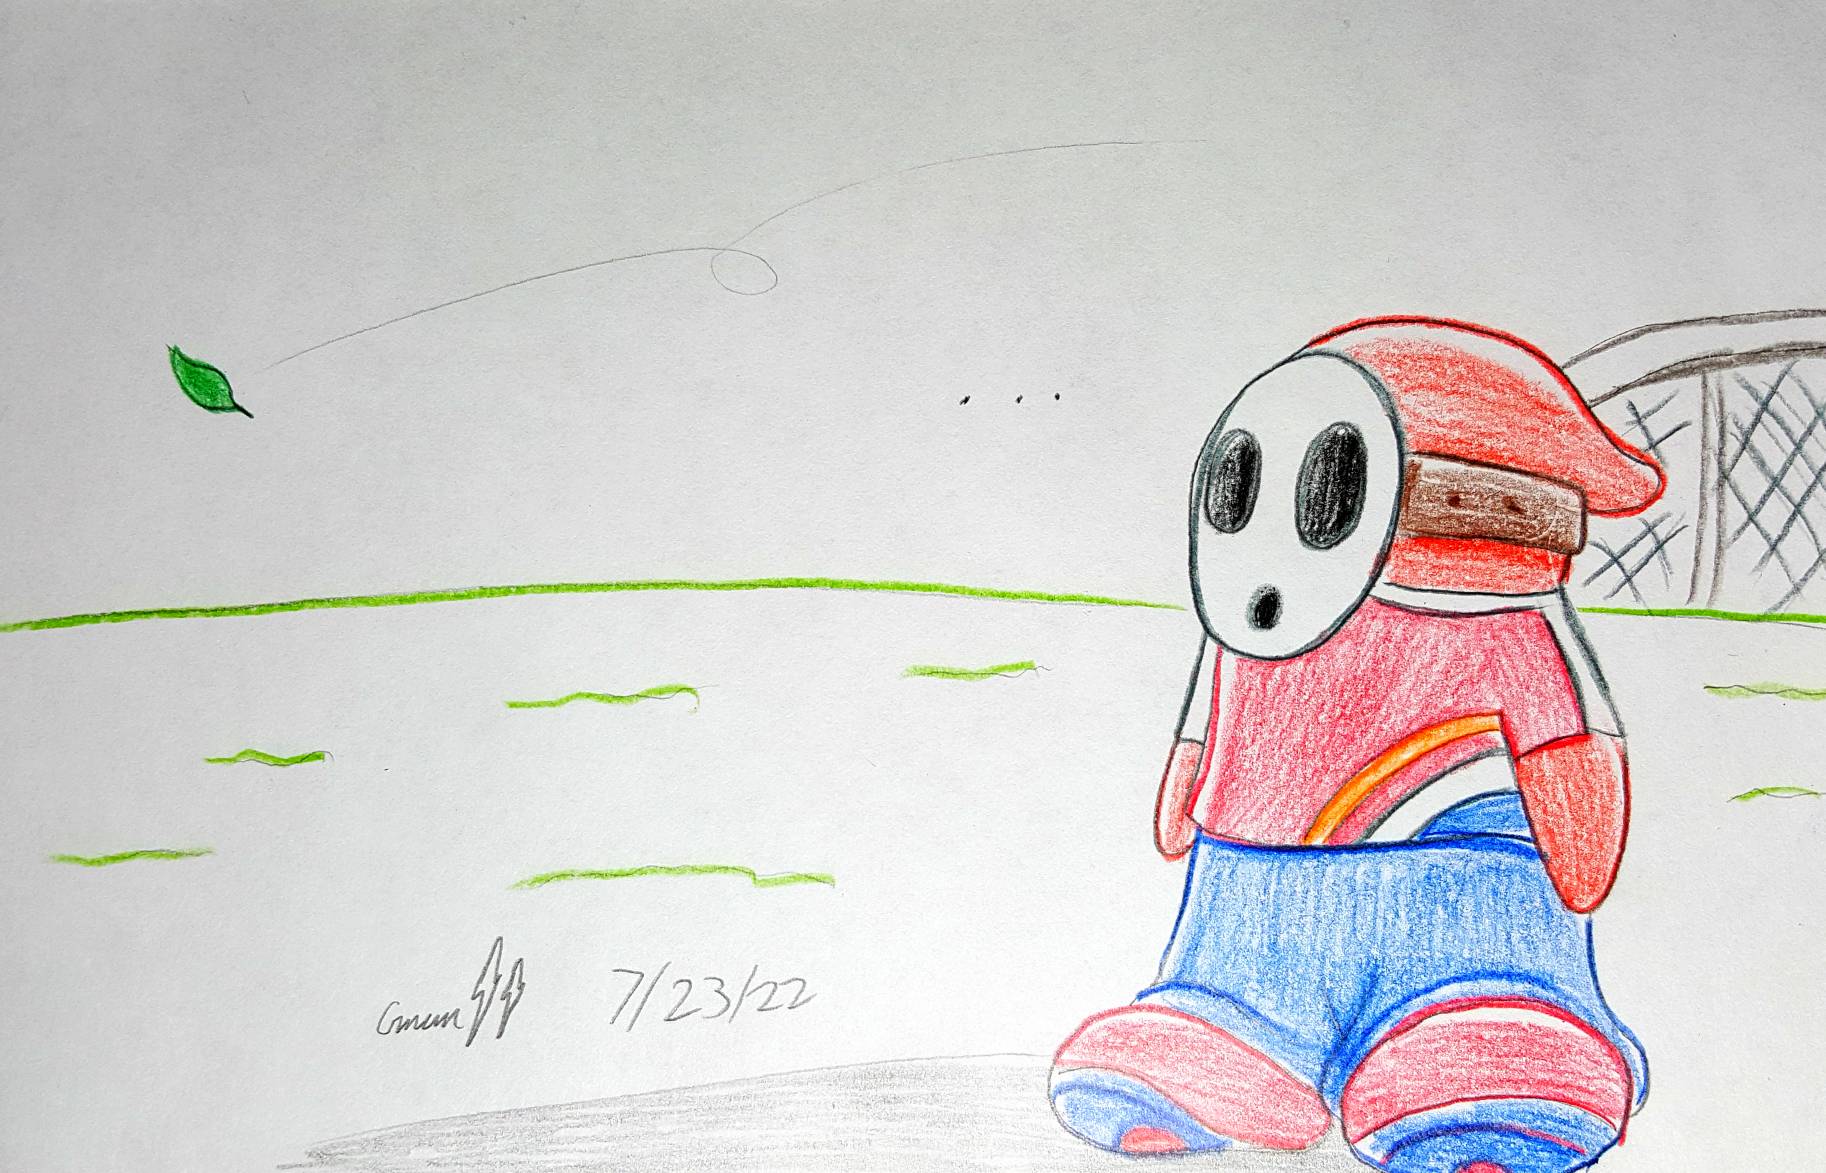 shy guy is Just Standing There Menacingly! by funnytime77 on DeviantArt